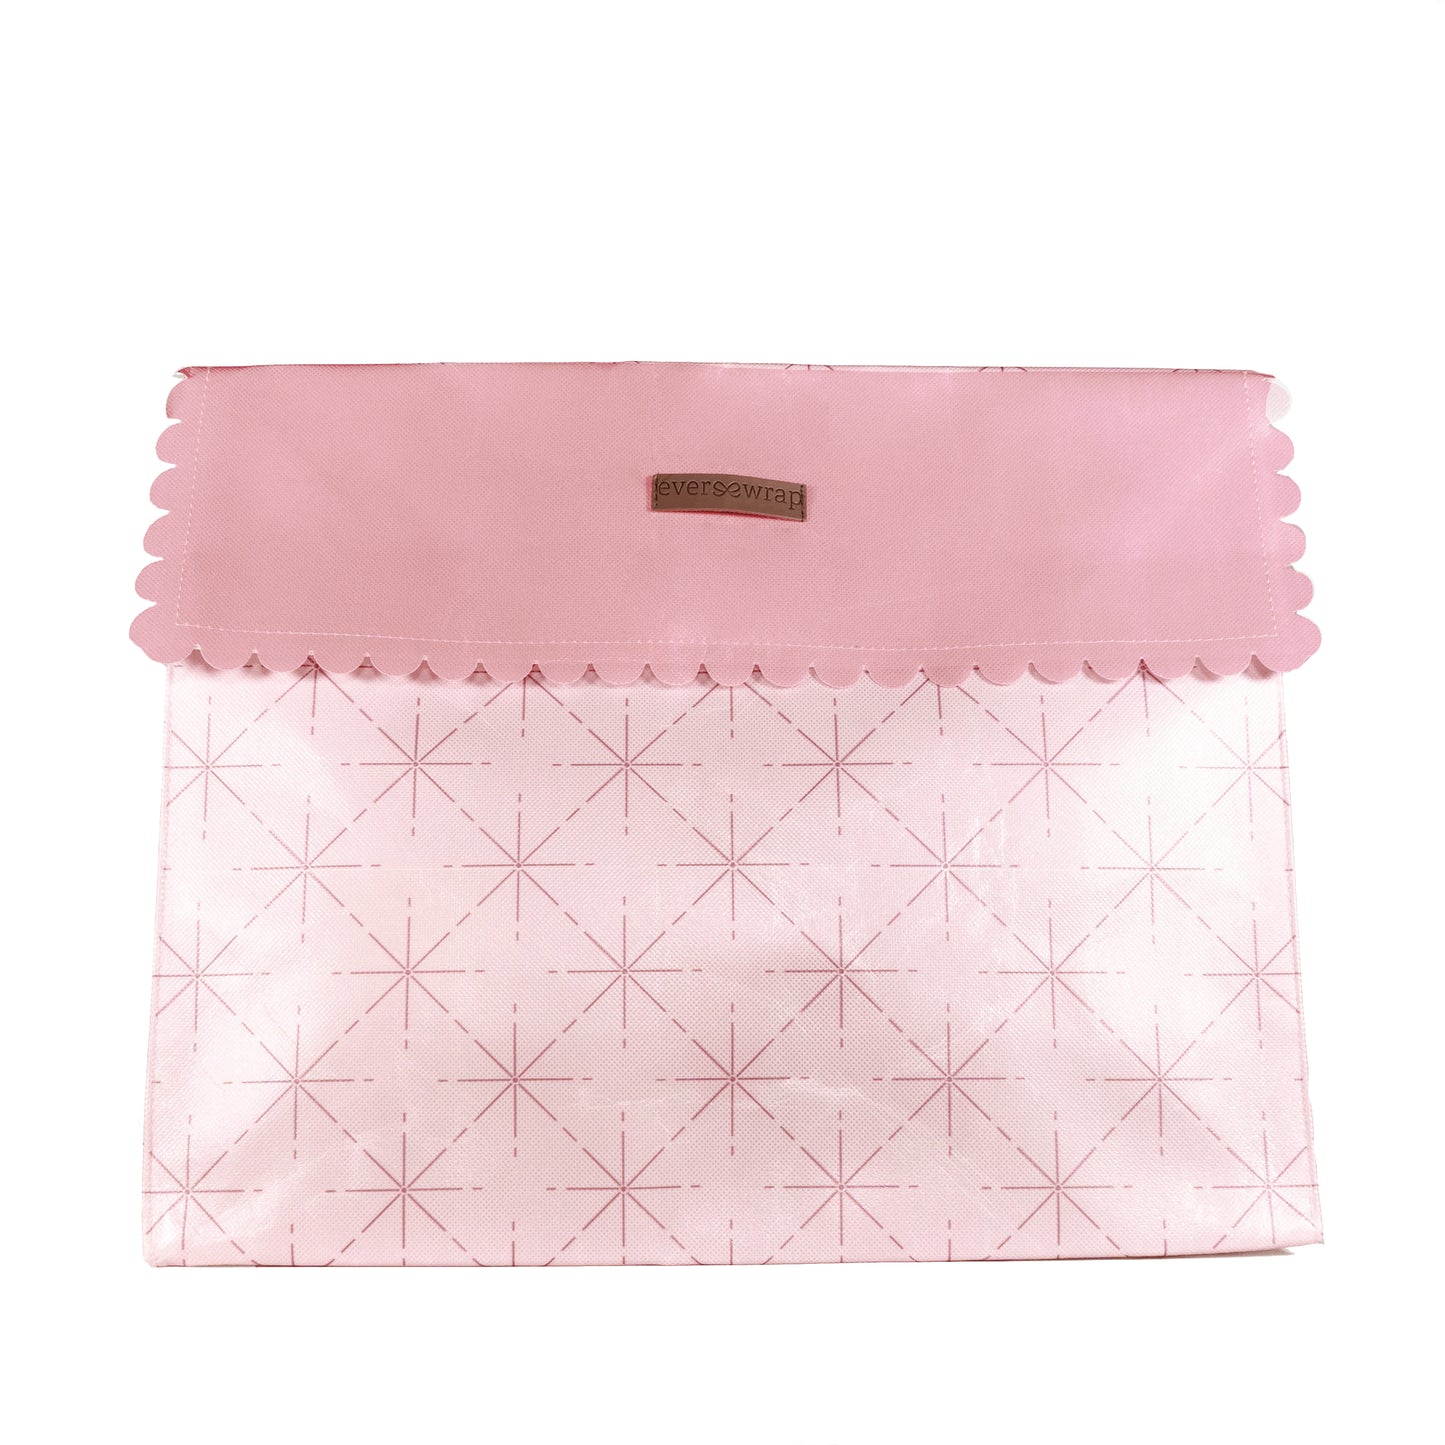 IRREGULAR - Large Pink Reusable Gift Bag with magnet closure and scalloped, heavy duty for maximum reusability - EverWrap